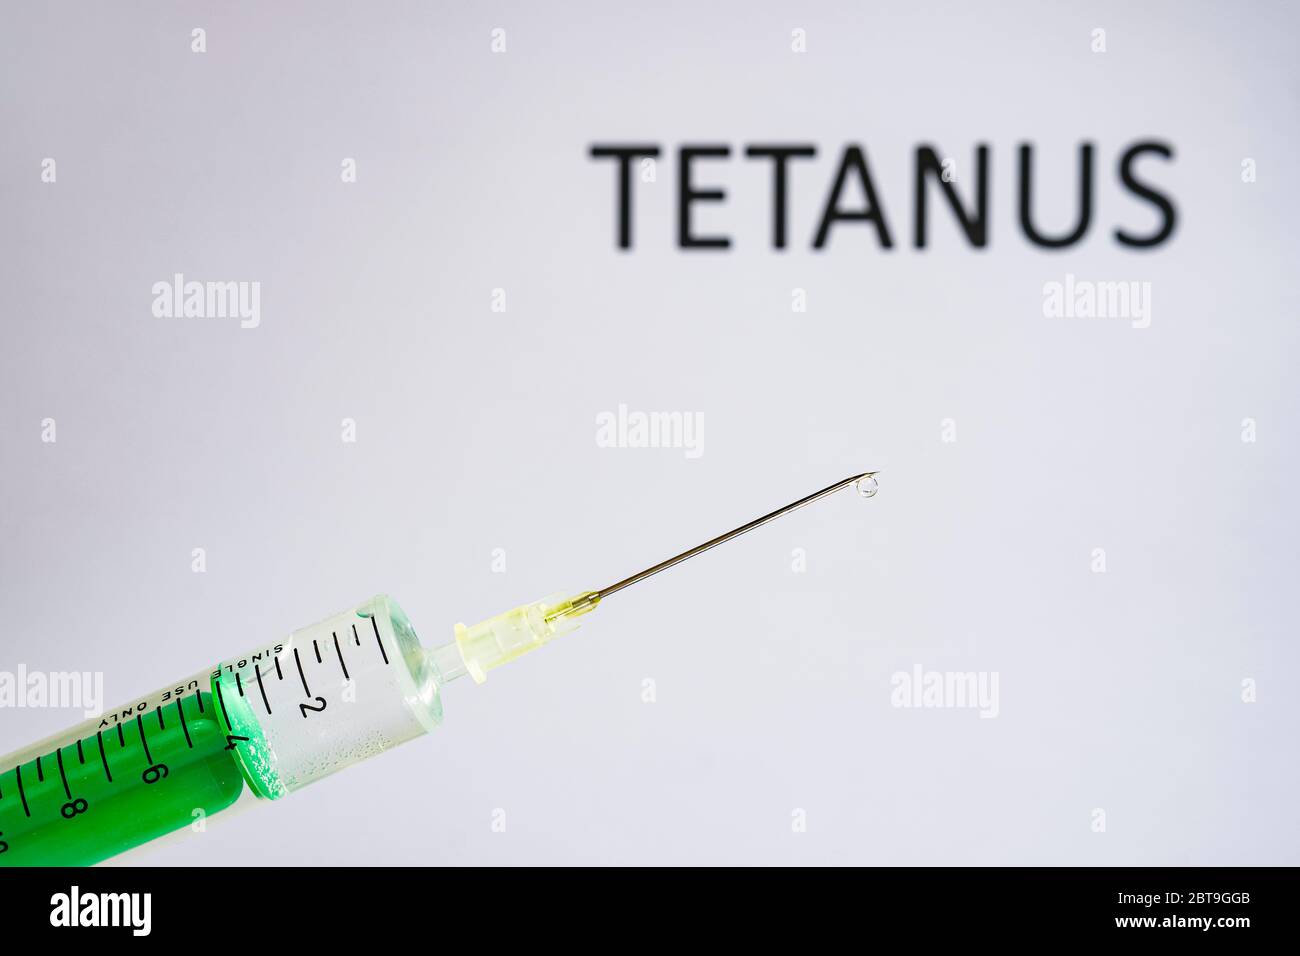 This photo illustration shows a disposable syringe with hypodermic needle, TETANUS written on a white board behind Stock Photo